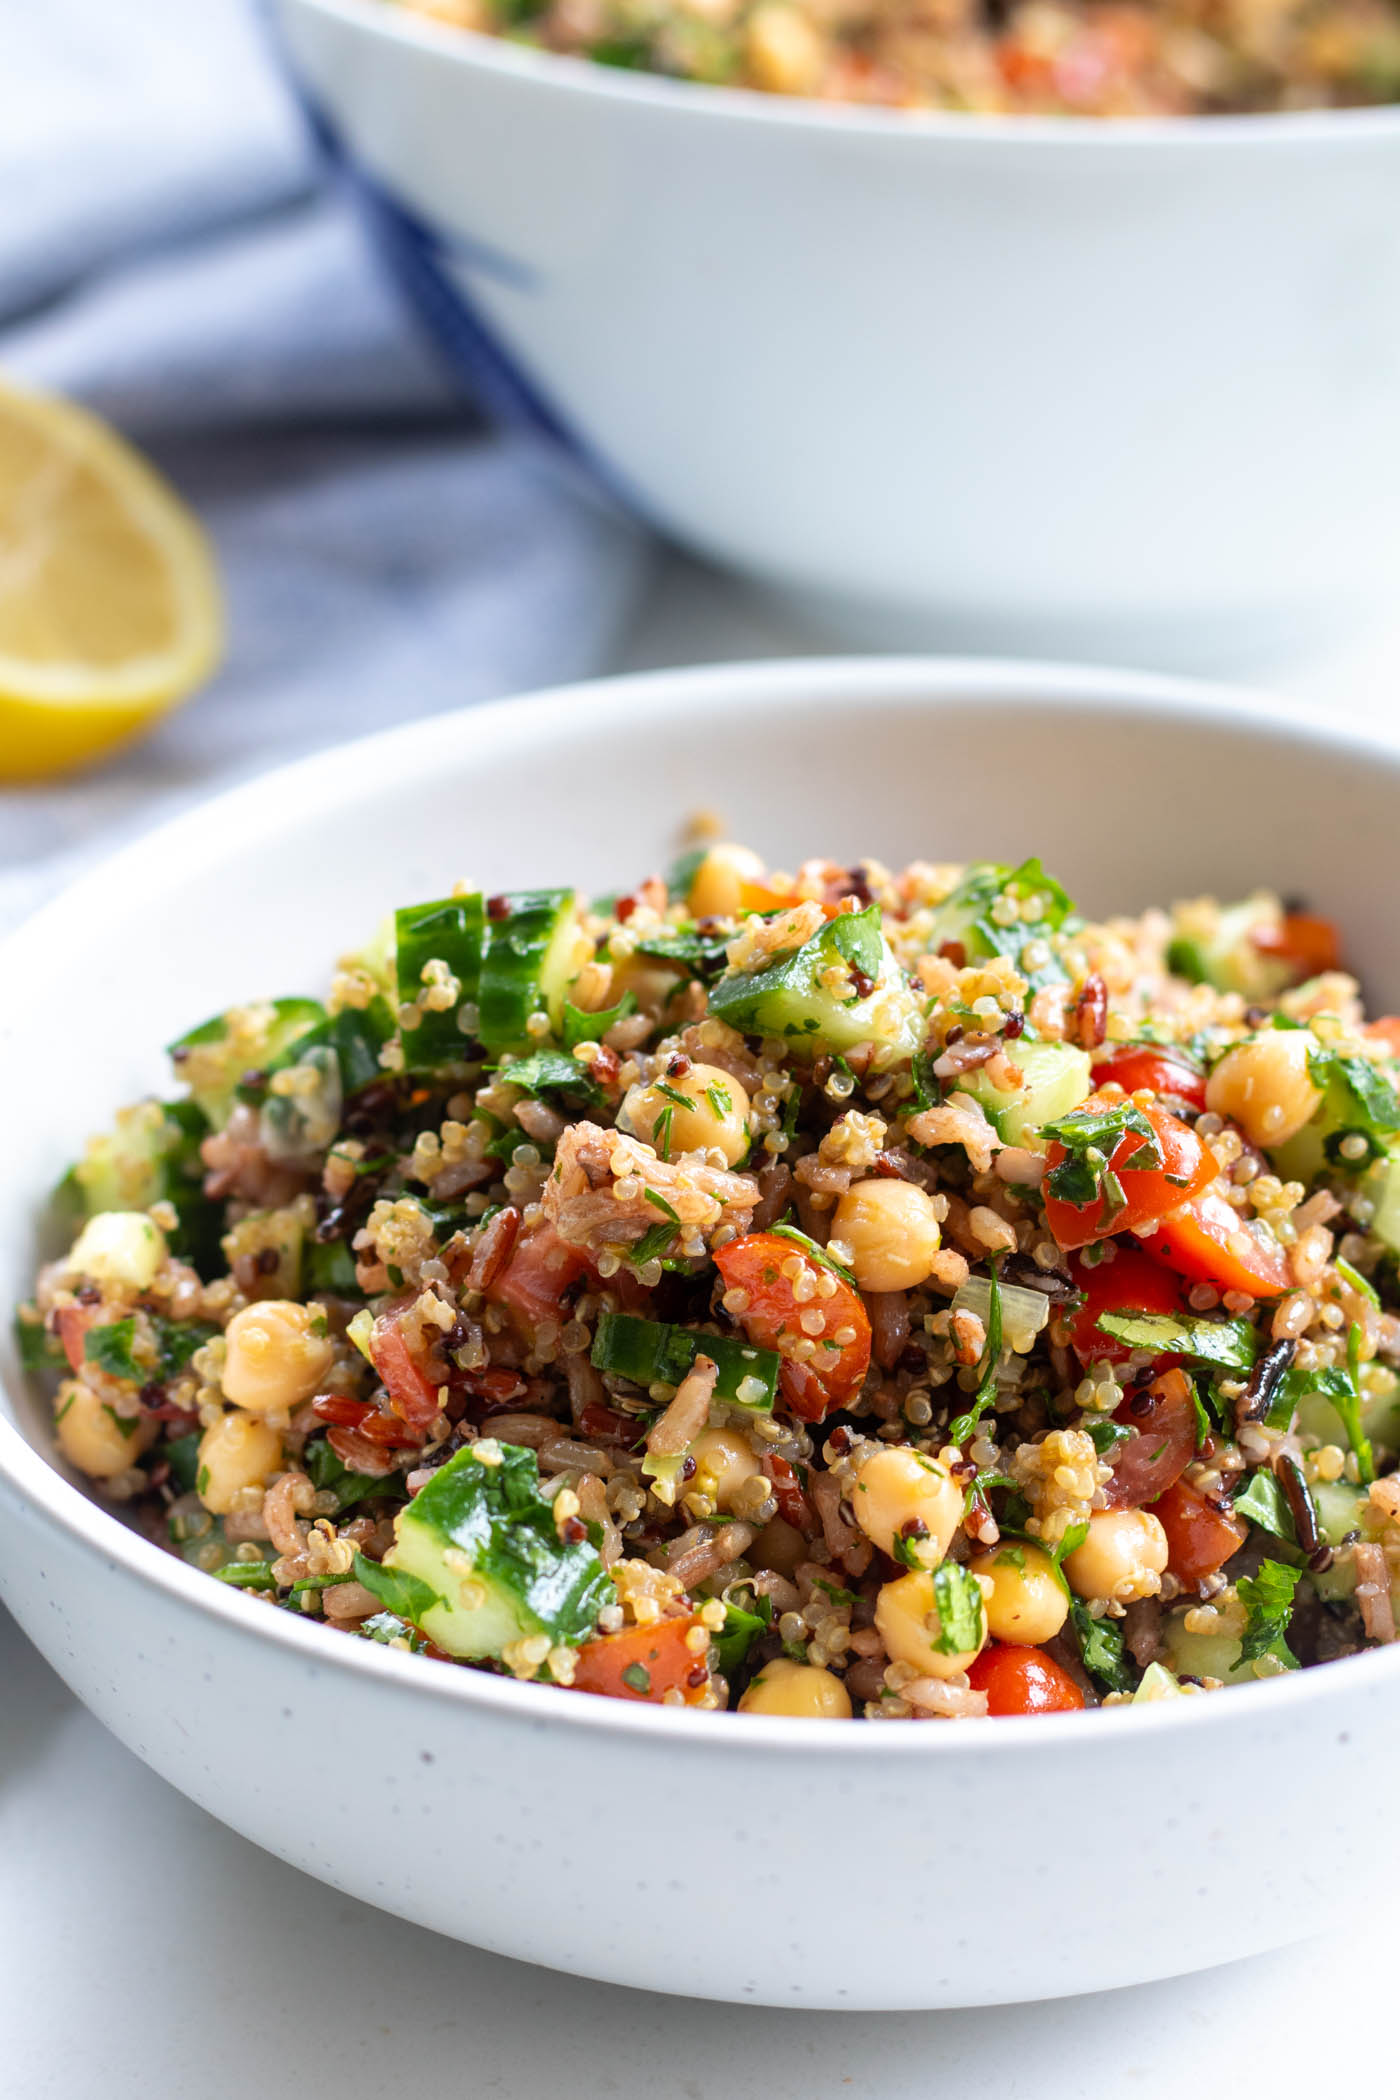 Colourful Brown Rice and Quinoa Salad with Herbs